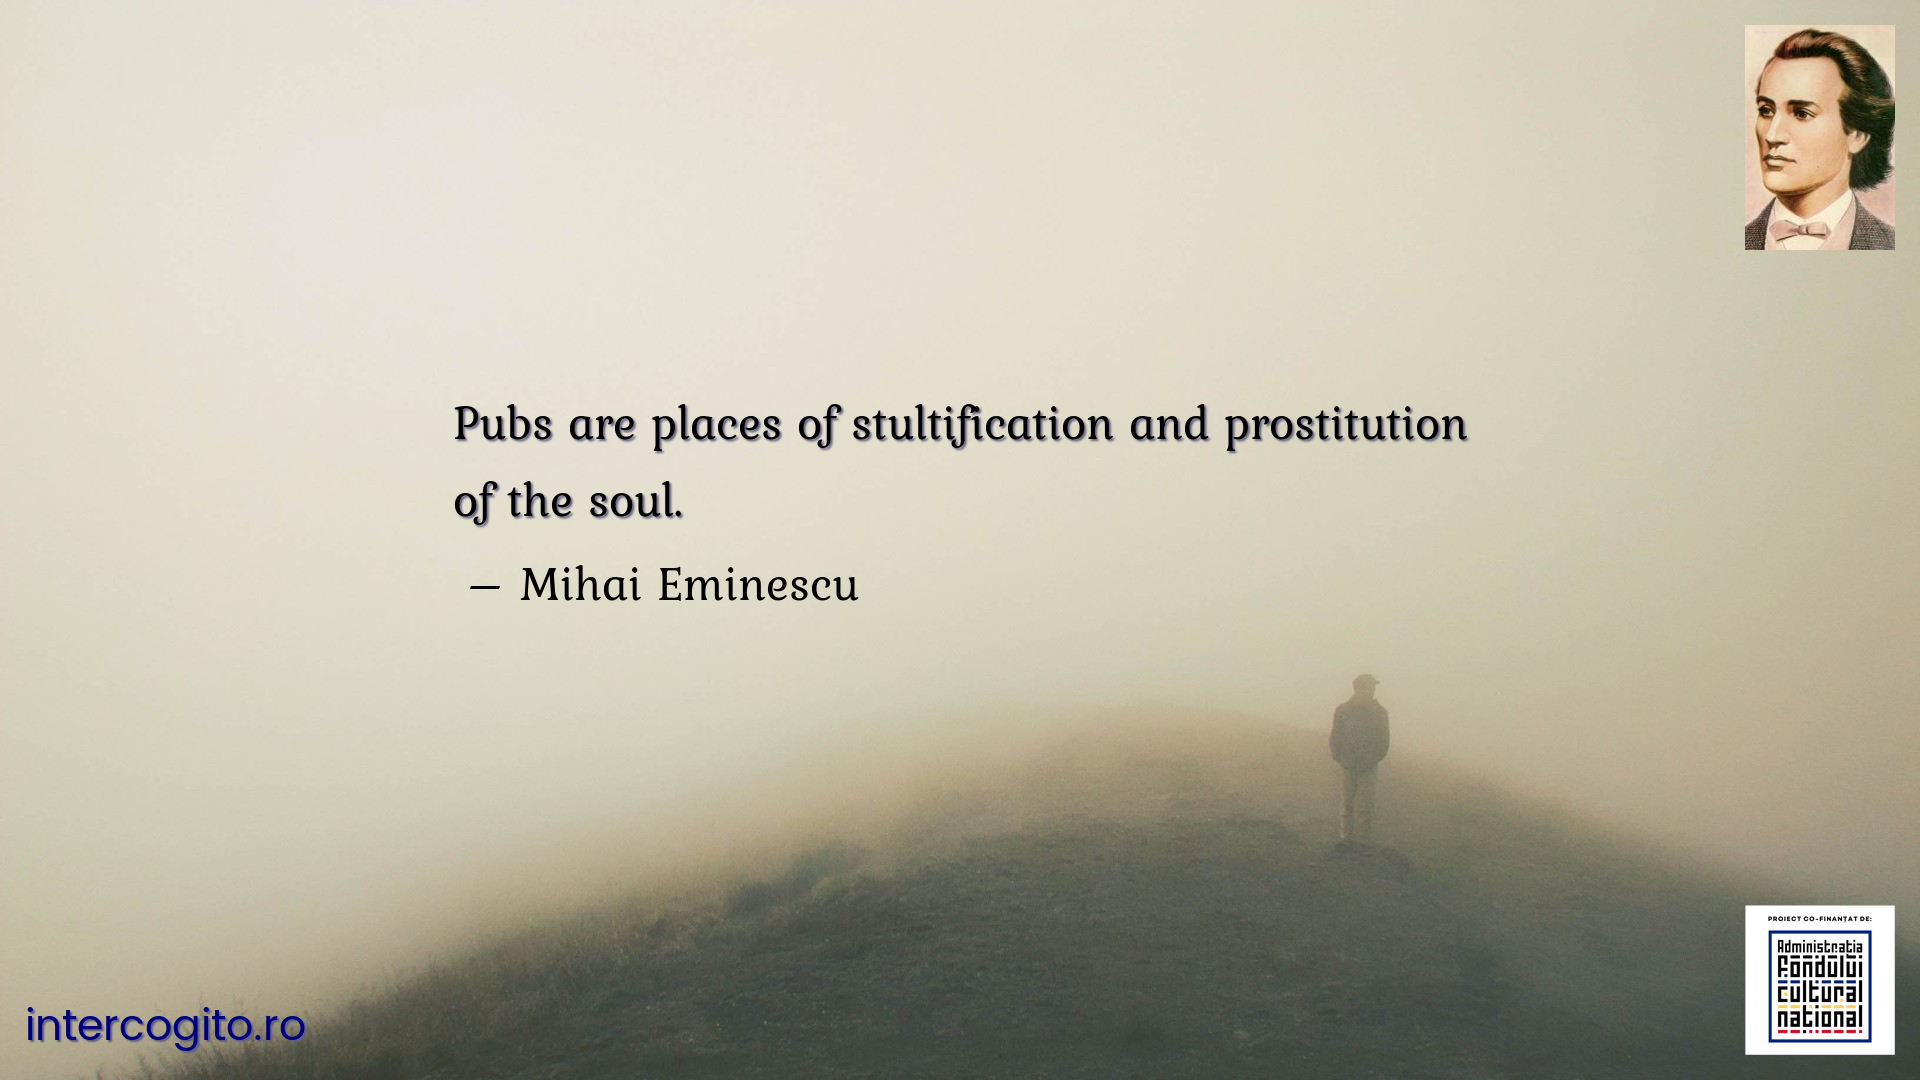 Pubs are places of stultification and prostitution of the soul.